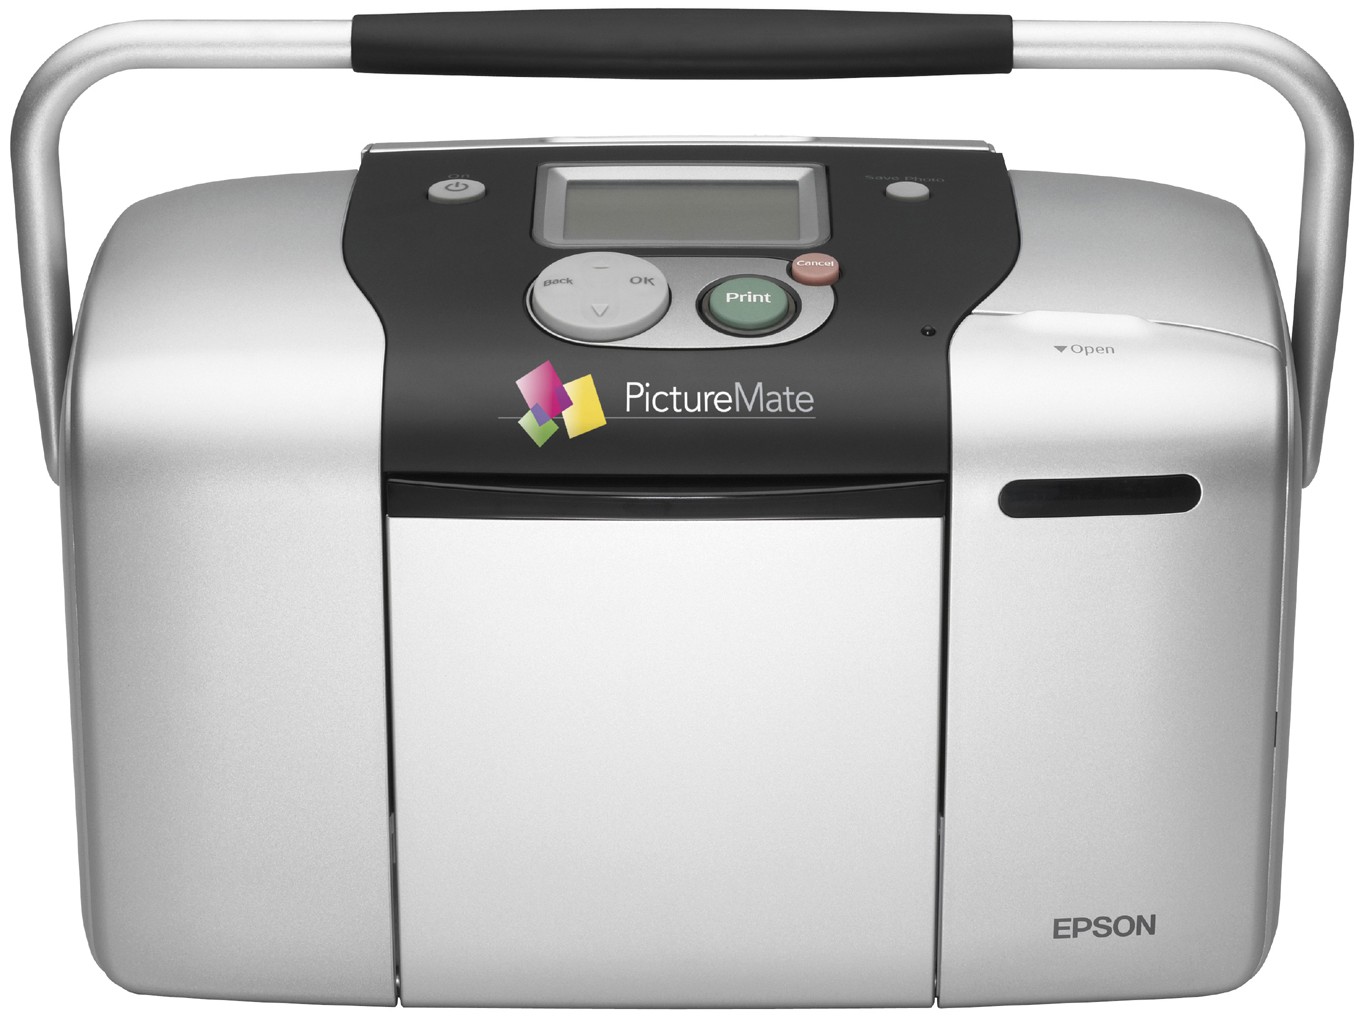 Step-by-step Driver Epson Printer Picturemate MX Linux Installation - Featured